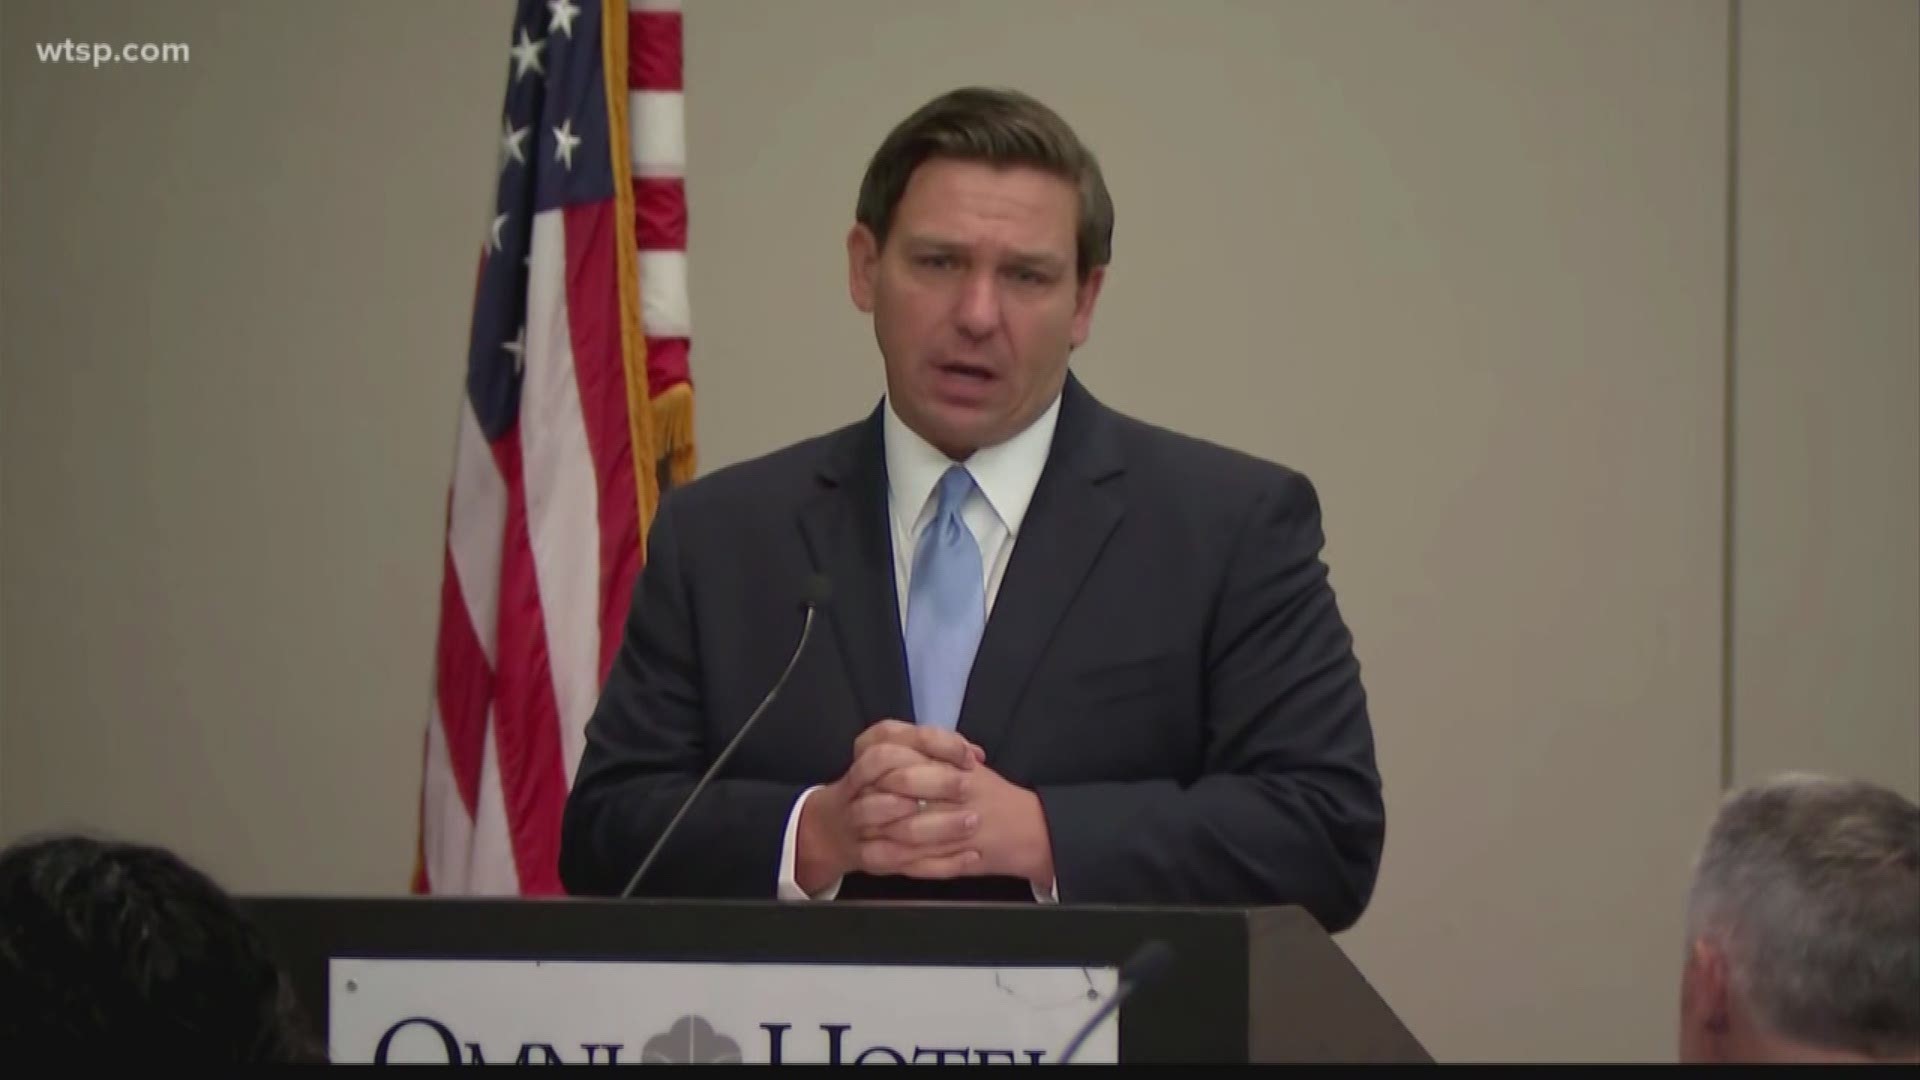 Florida Governor Ron DeSantis issued a state of emergency Wednesday for counties in Hurricane Dorian's path.

DeSantis urged all Floridians on the state’s east coast to prepare for impacts, as the latest forecasts from the National Hurricane Center project Hurricane Dorian making landfall there as a major hurricane.